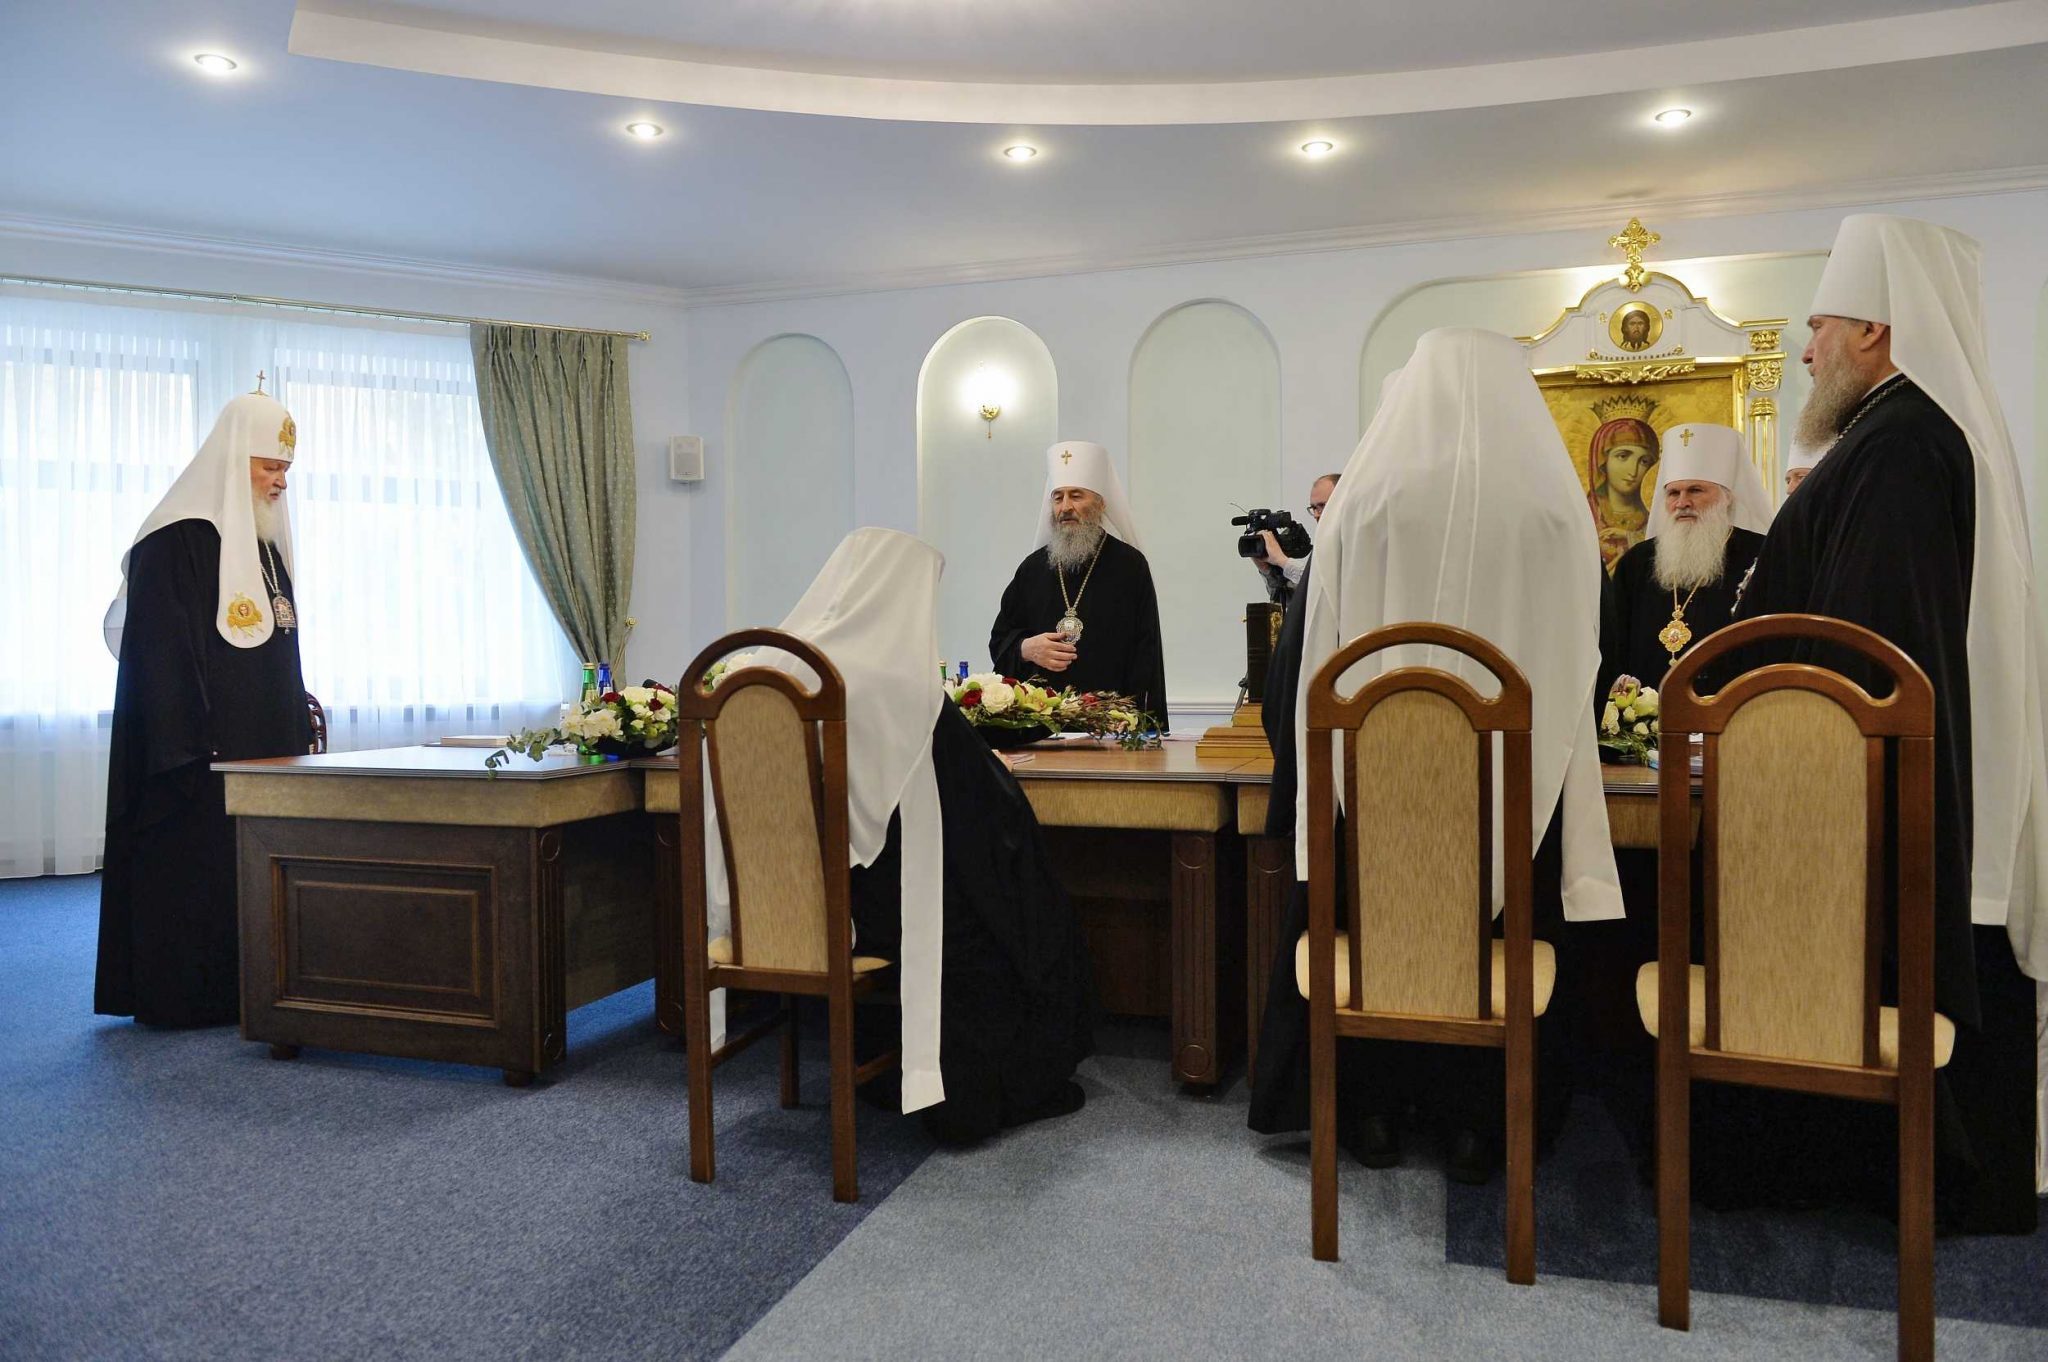 Statement by the holy synod of the russian orthodox church concerning the encroachment of the patriarchate of constantinople on the canonical territory of the russian church